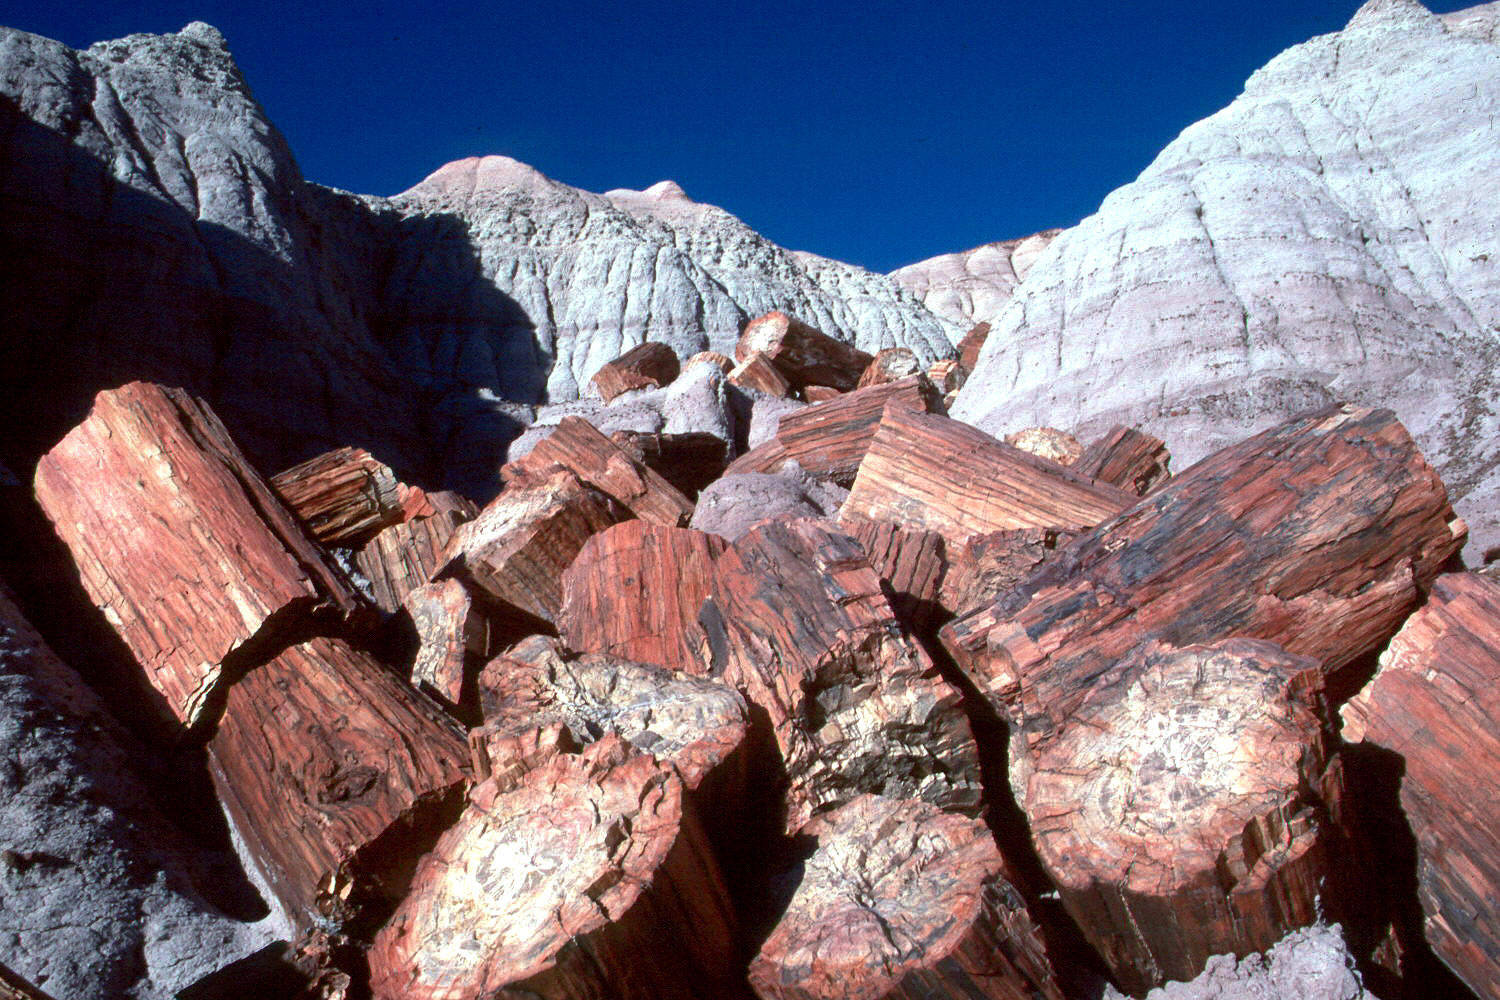 Photograph of a pile of red-colored petrified logs at the base of gray-and-red layered badlands in Petrified National Forest, Arizona.